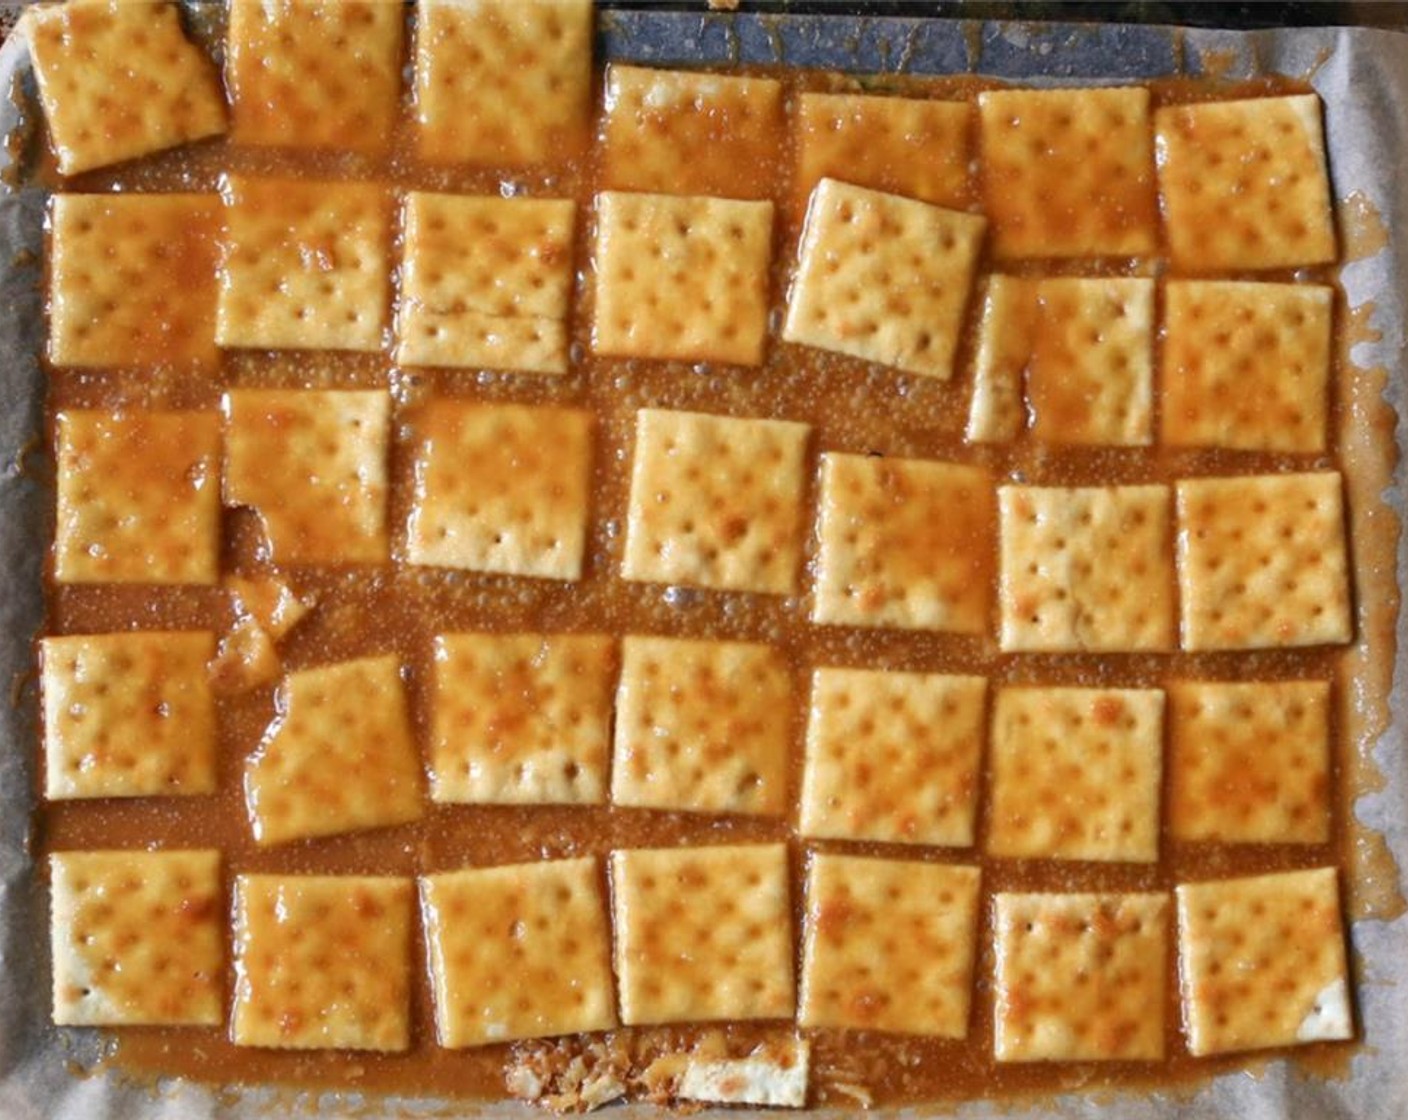 step 5 Transfer the Saltines to the oven and bake for 4 minutes. The toffee should be bubbling and slightly darker in color. The crackers will spread, and that's okay.